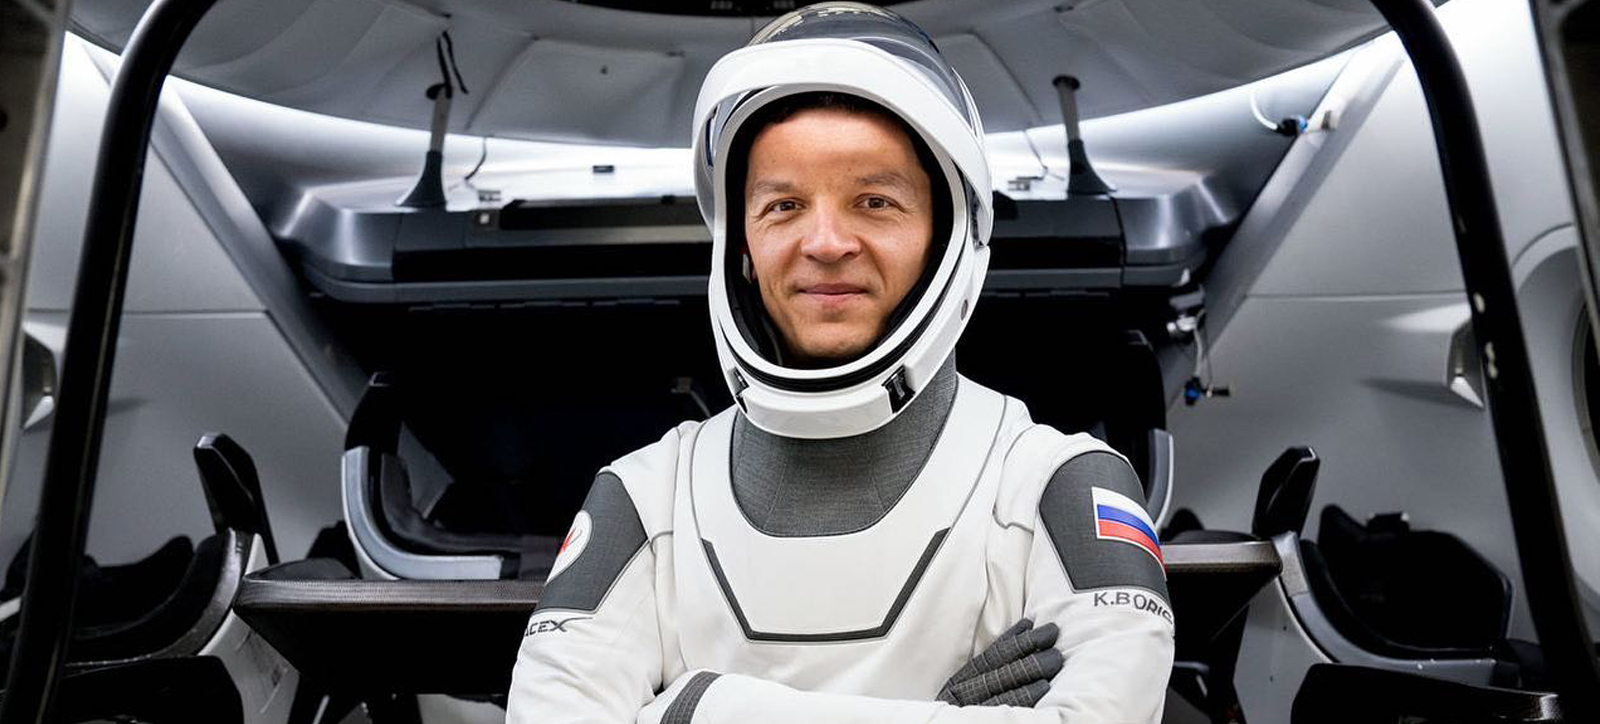 Warwick Business School alum Konstantin Borisov, who is travelling to the International Space Station aboard a NASA mission